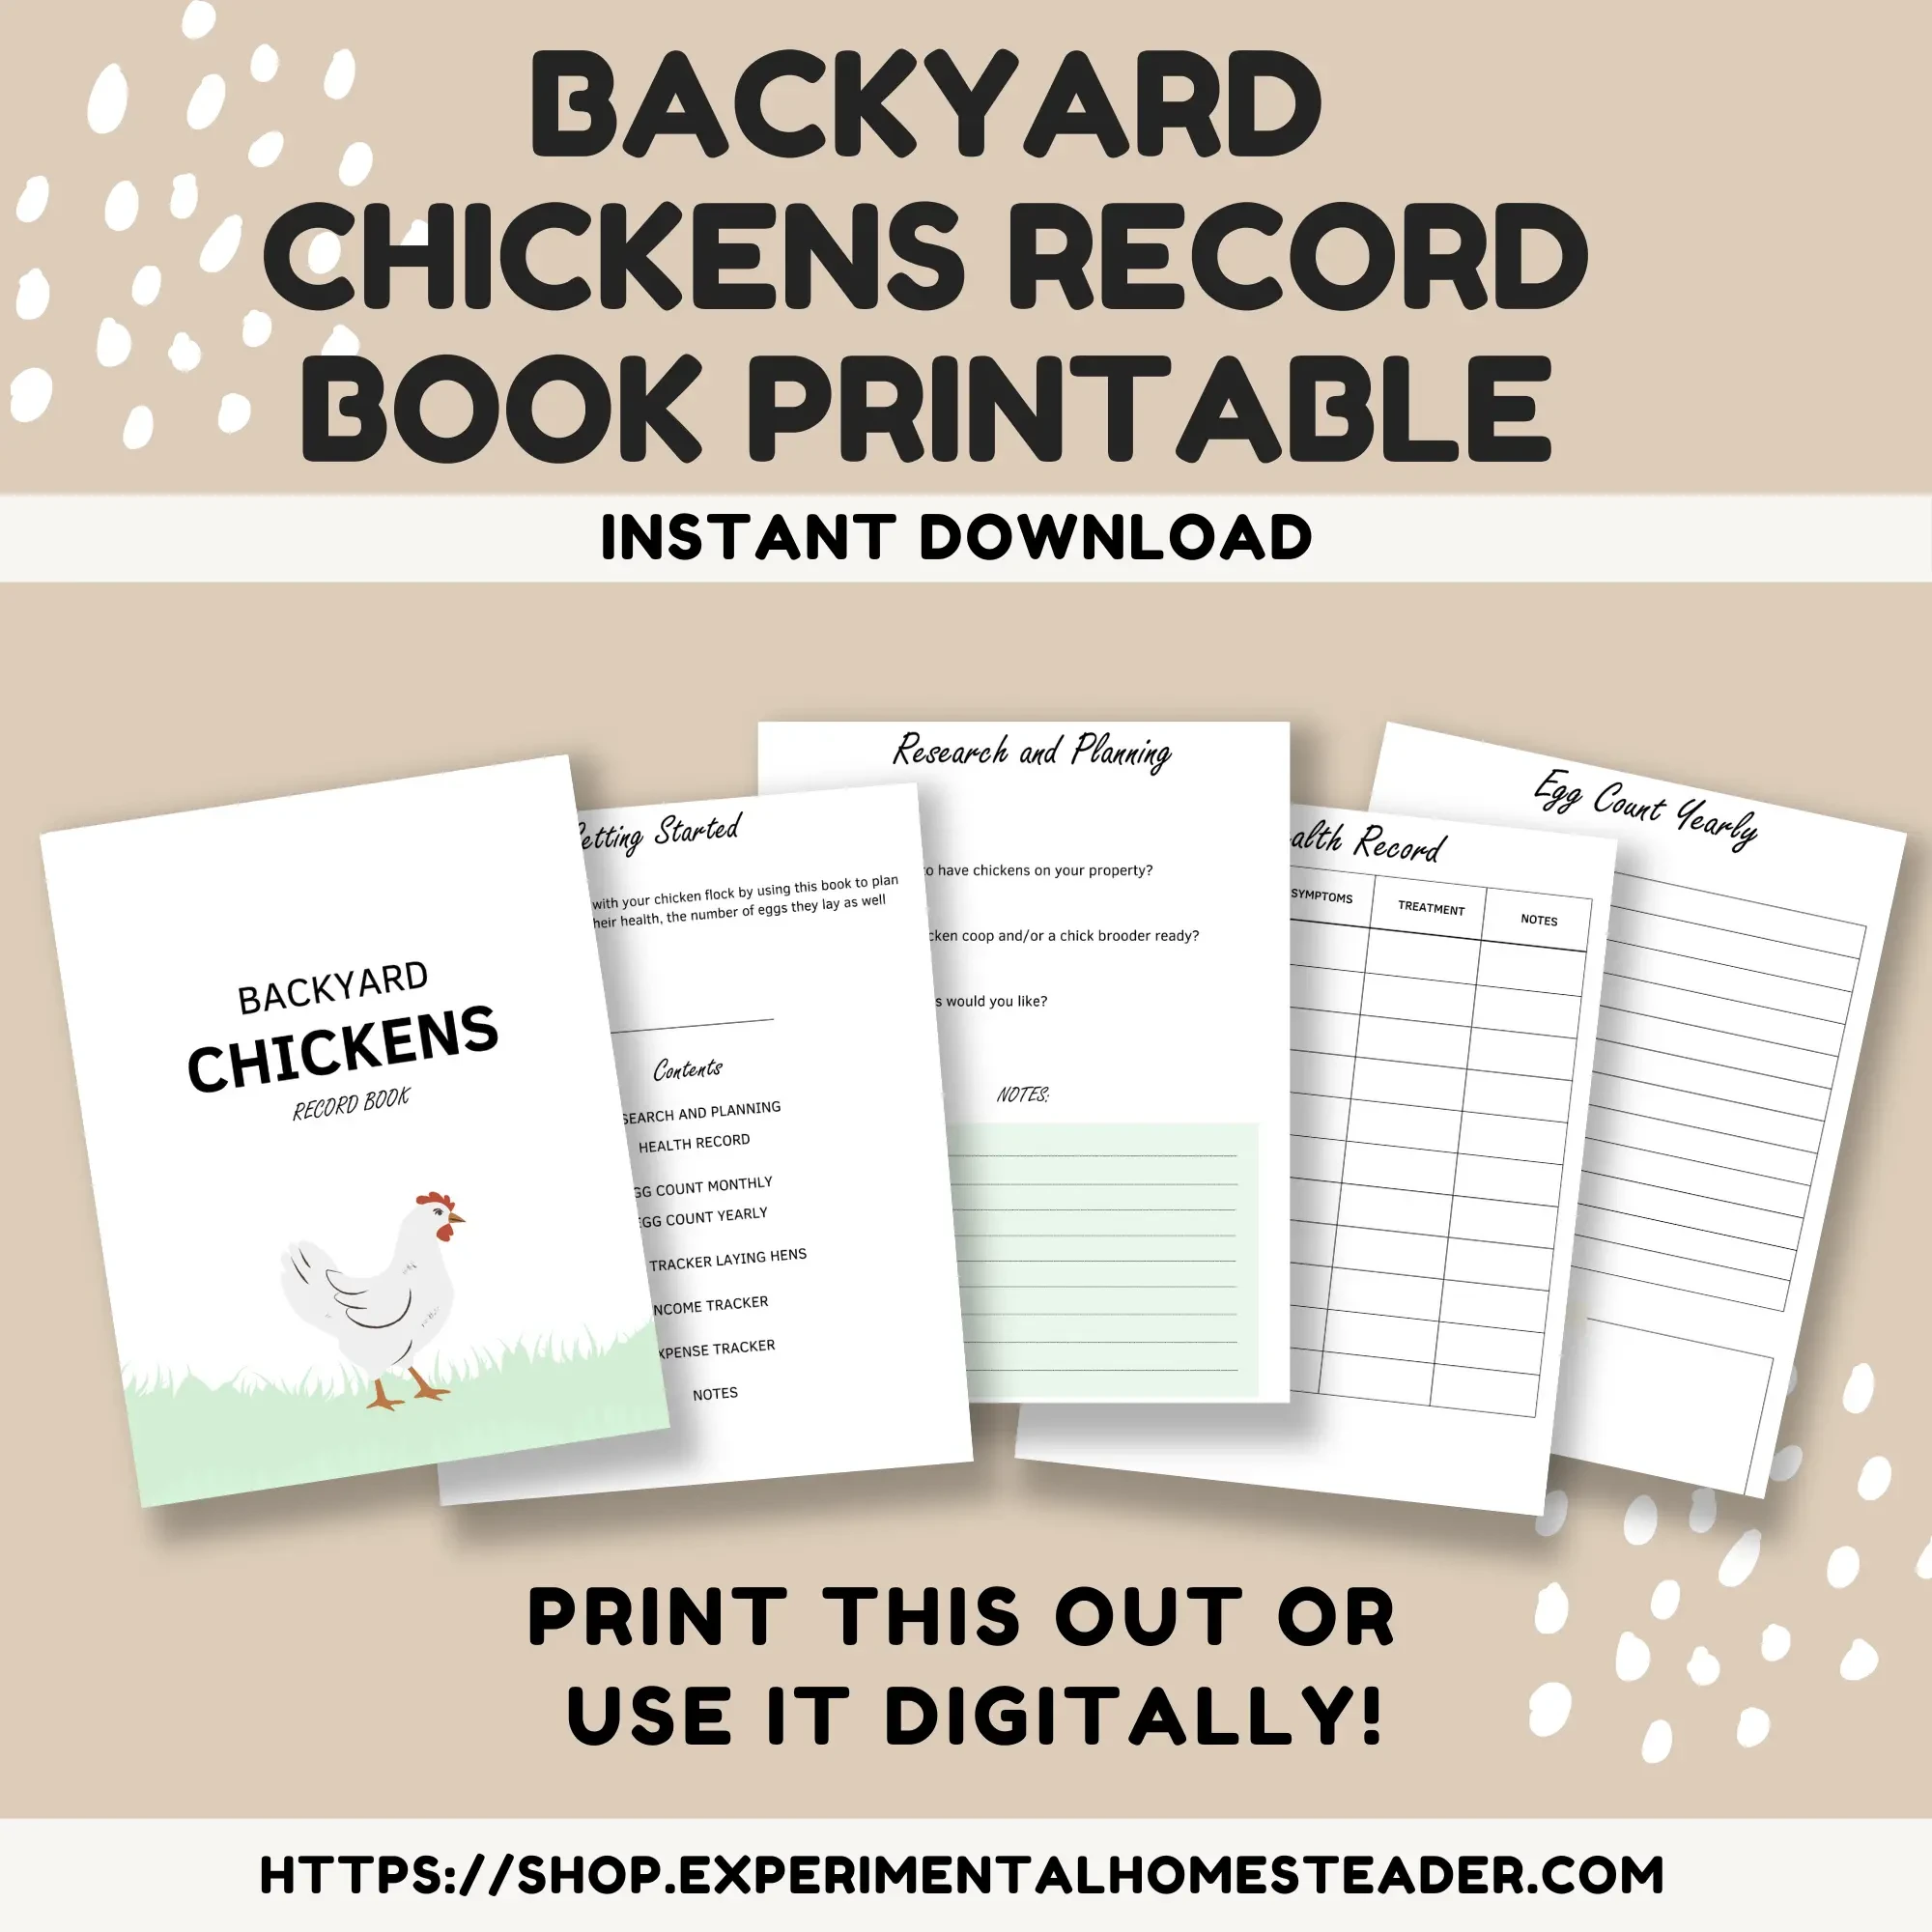 images of the backyard chicken binder